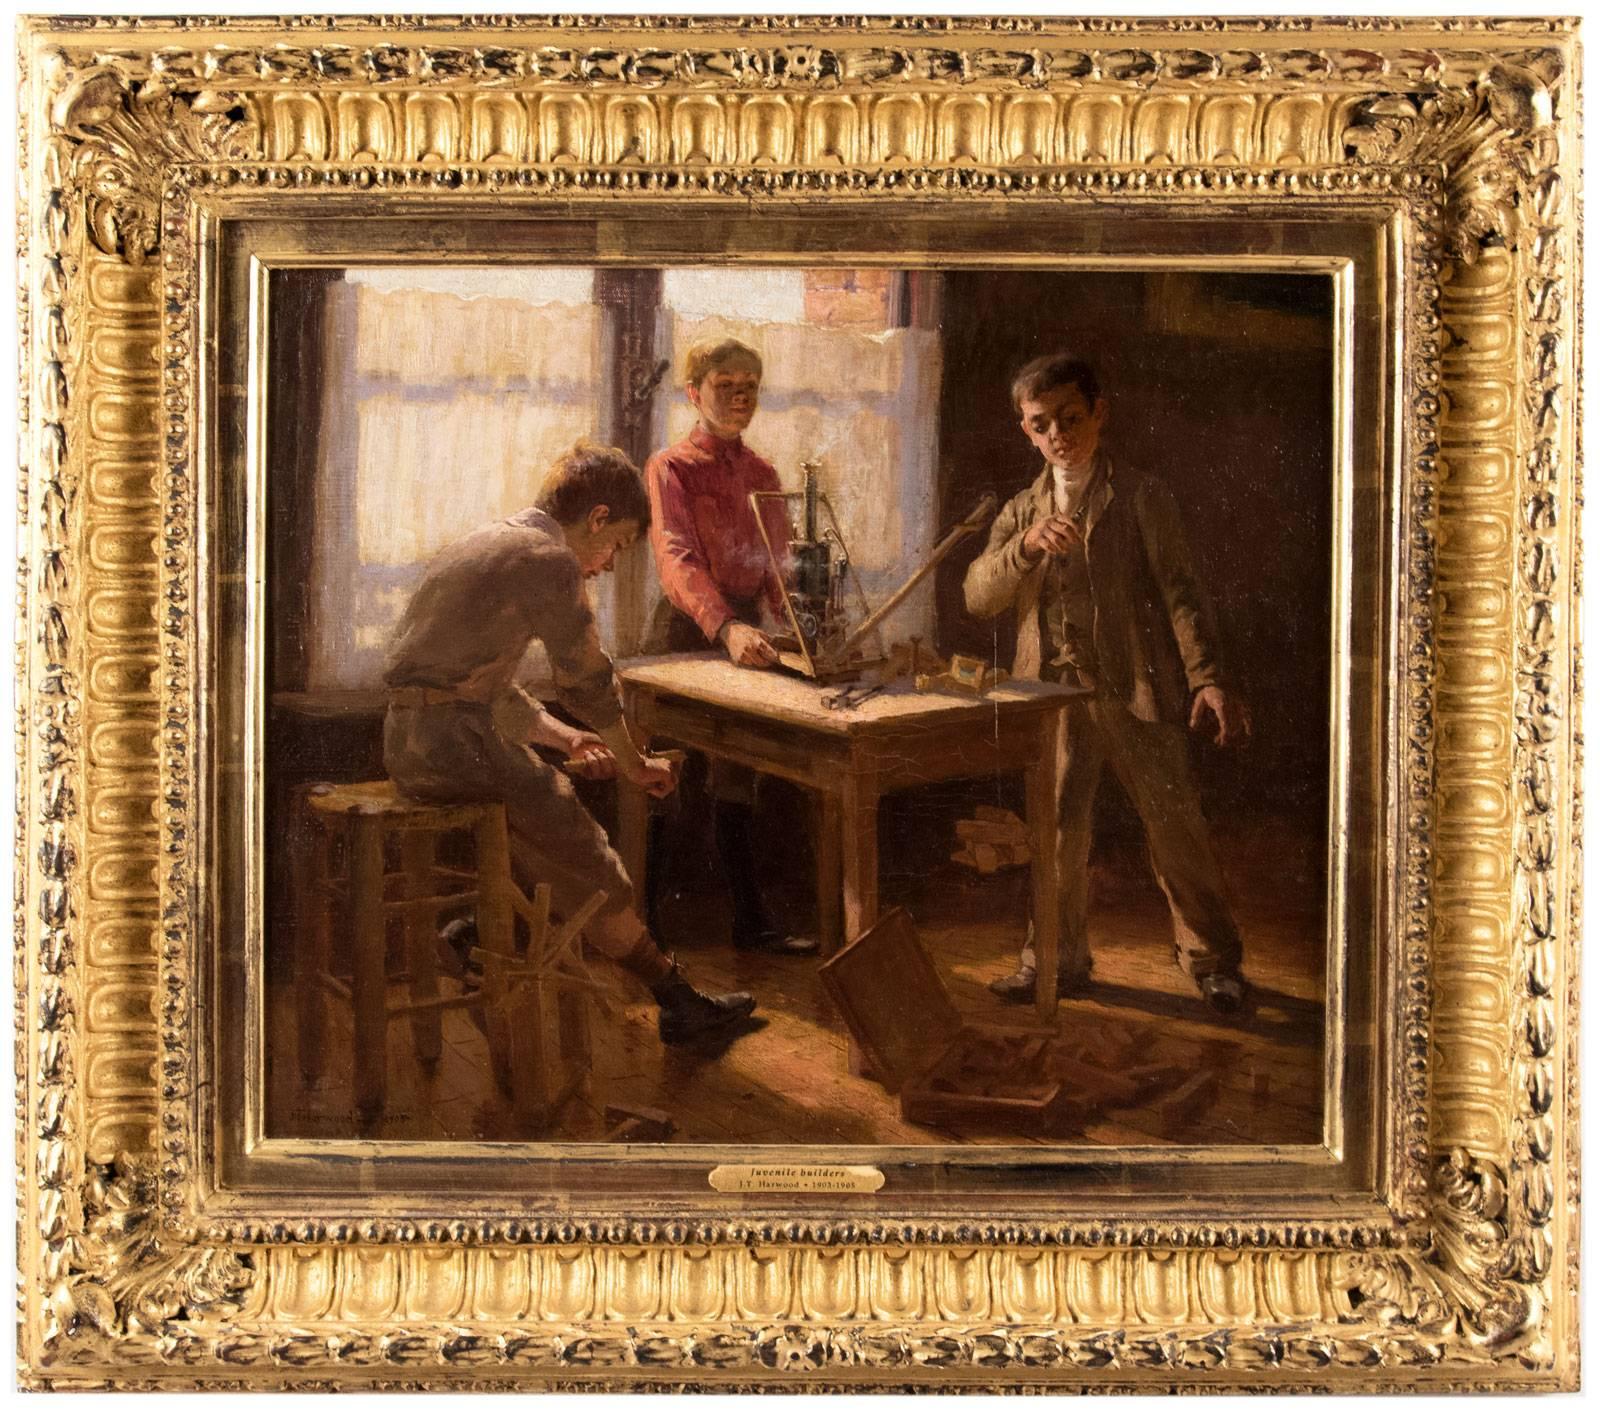 Three young, inquisitive boys gather around a table full of building devices, engineering their imaginative processes and curiosities. This image of these young builders continues the innovative undercurrent found in other works by Harwood that